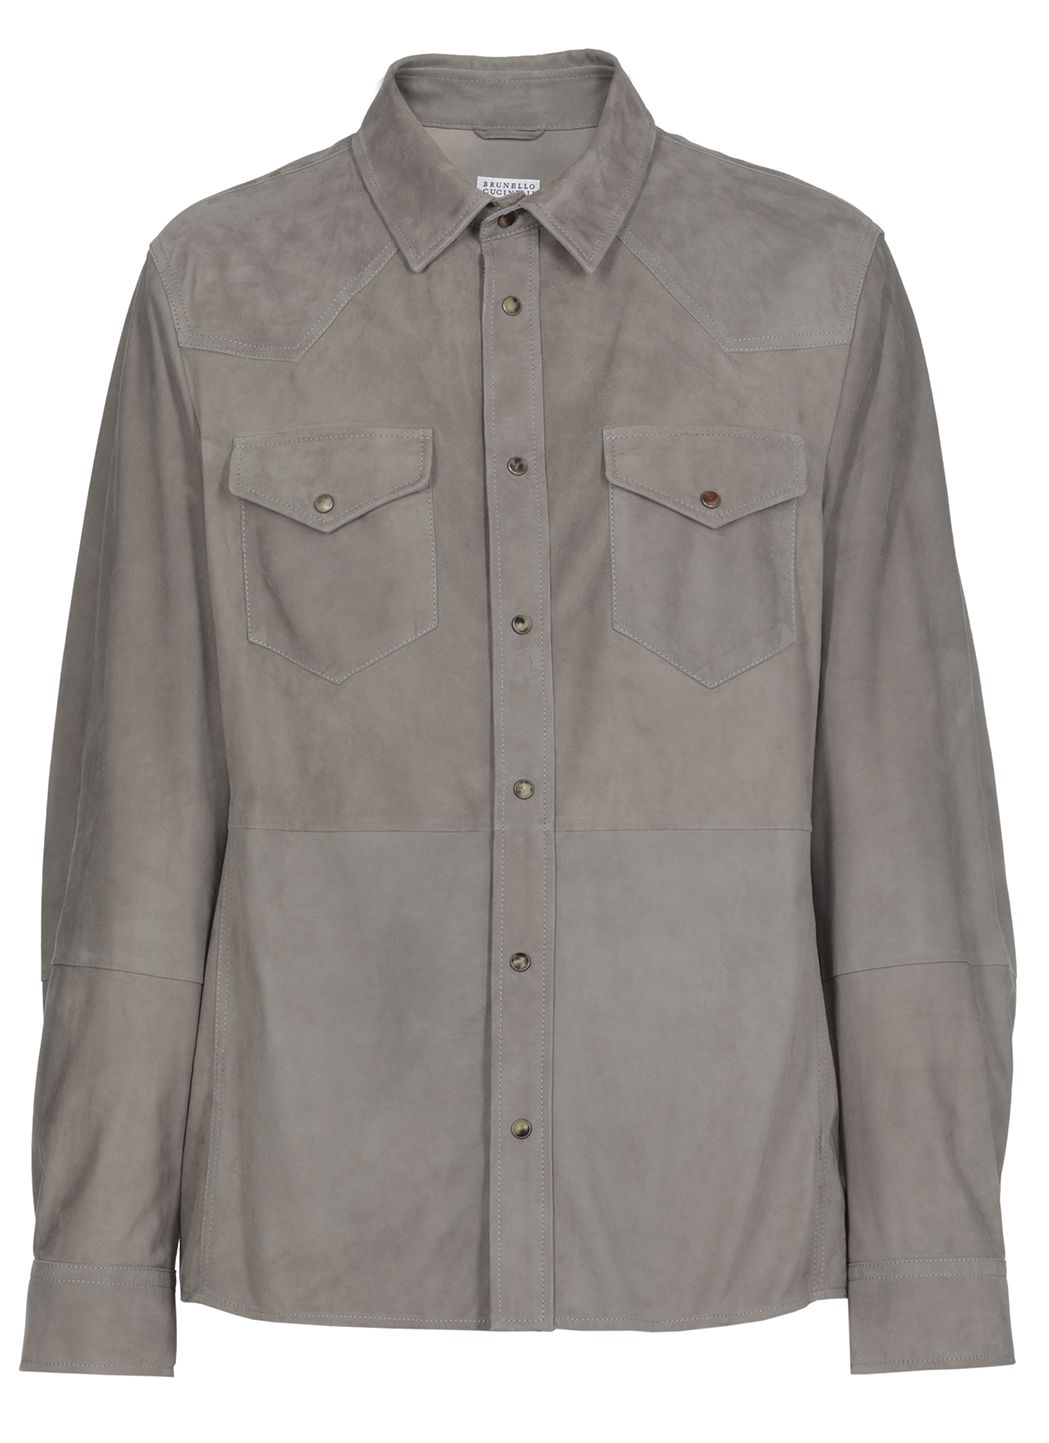 Suede leather shirt